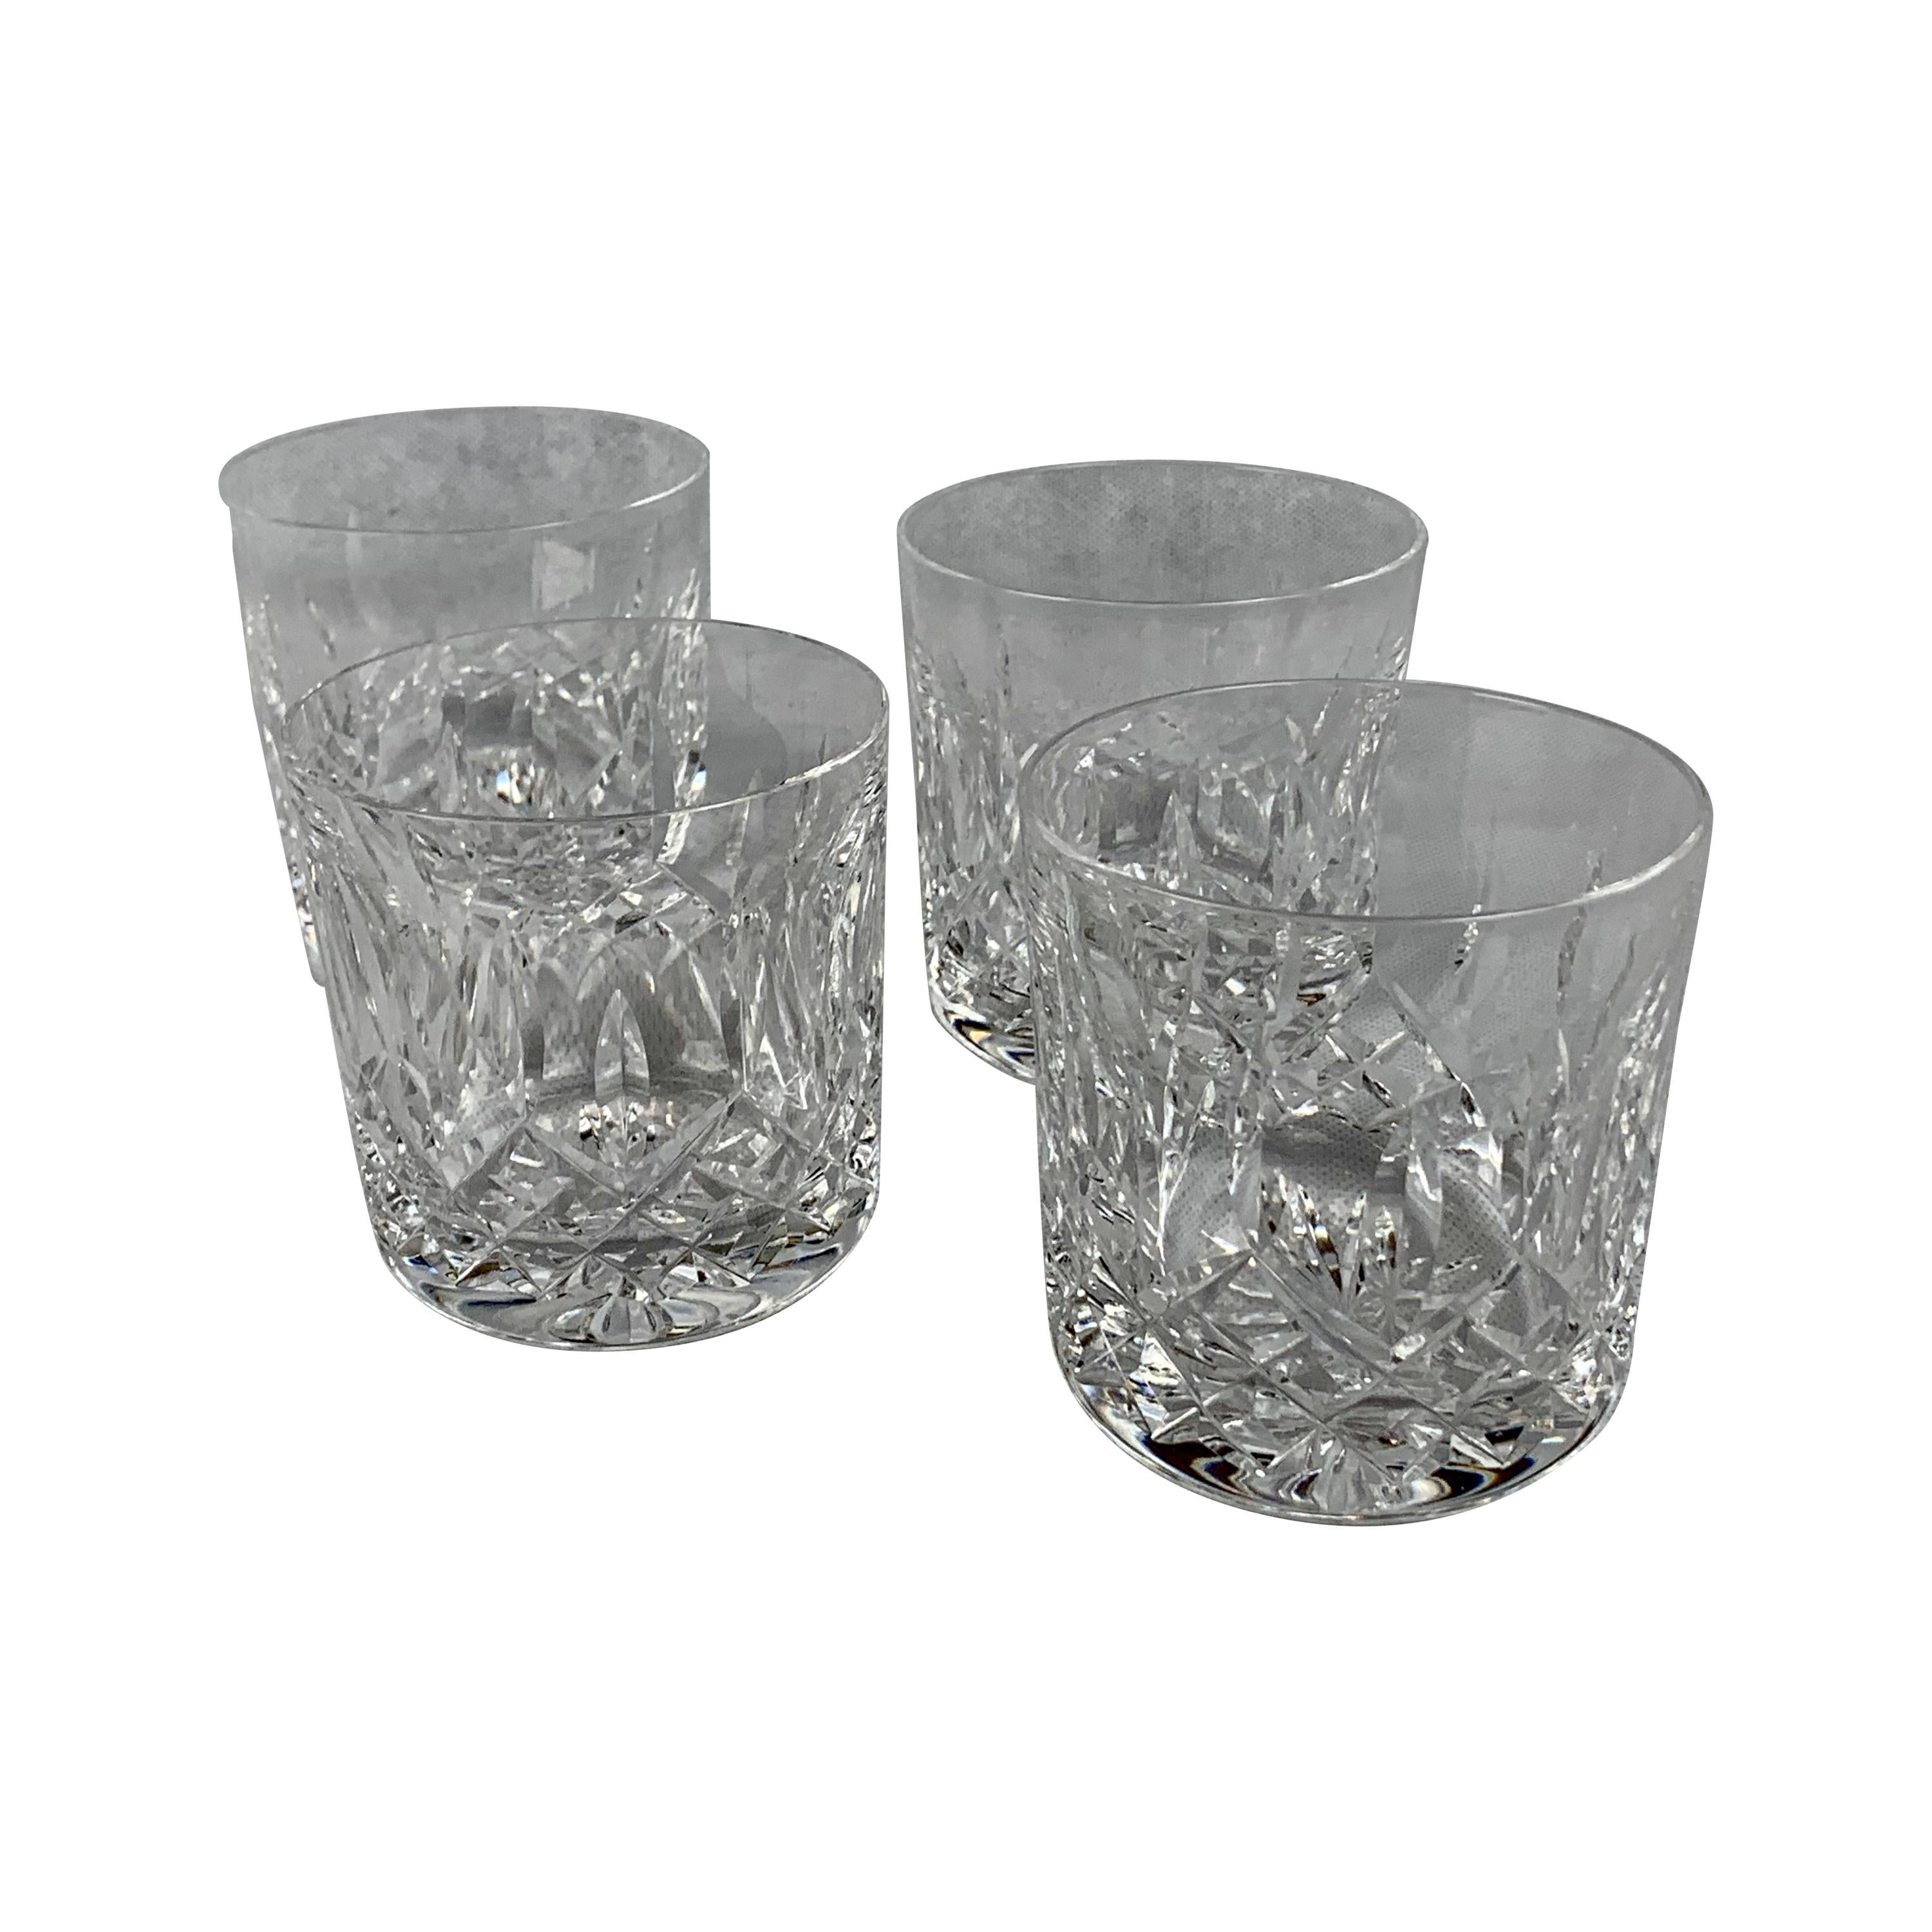   Set of Four Old Fashioned Cut Crystal Glasses by Waterford in Pattern Lismore 